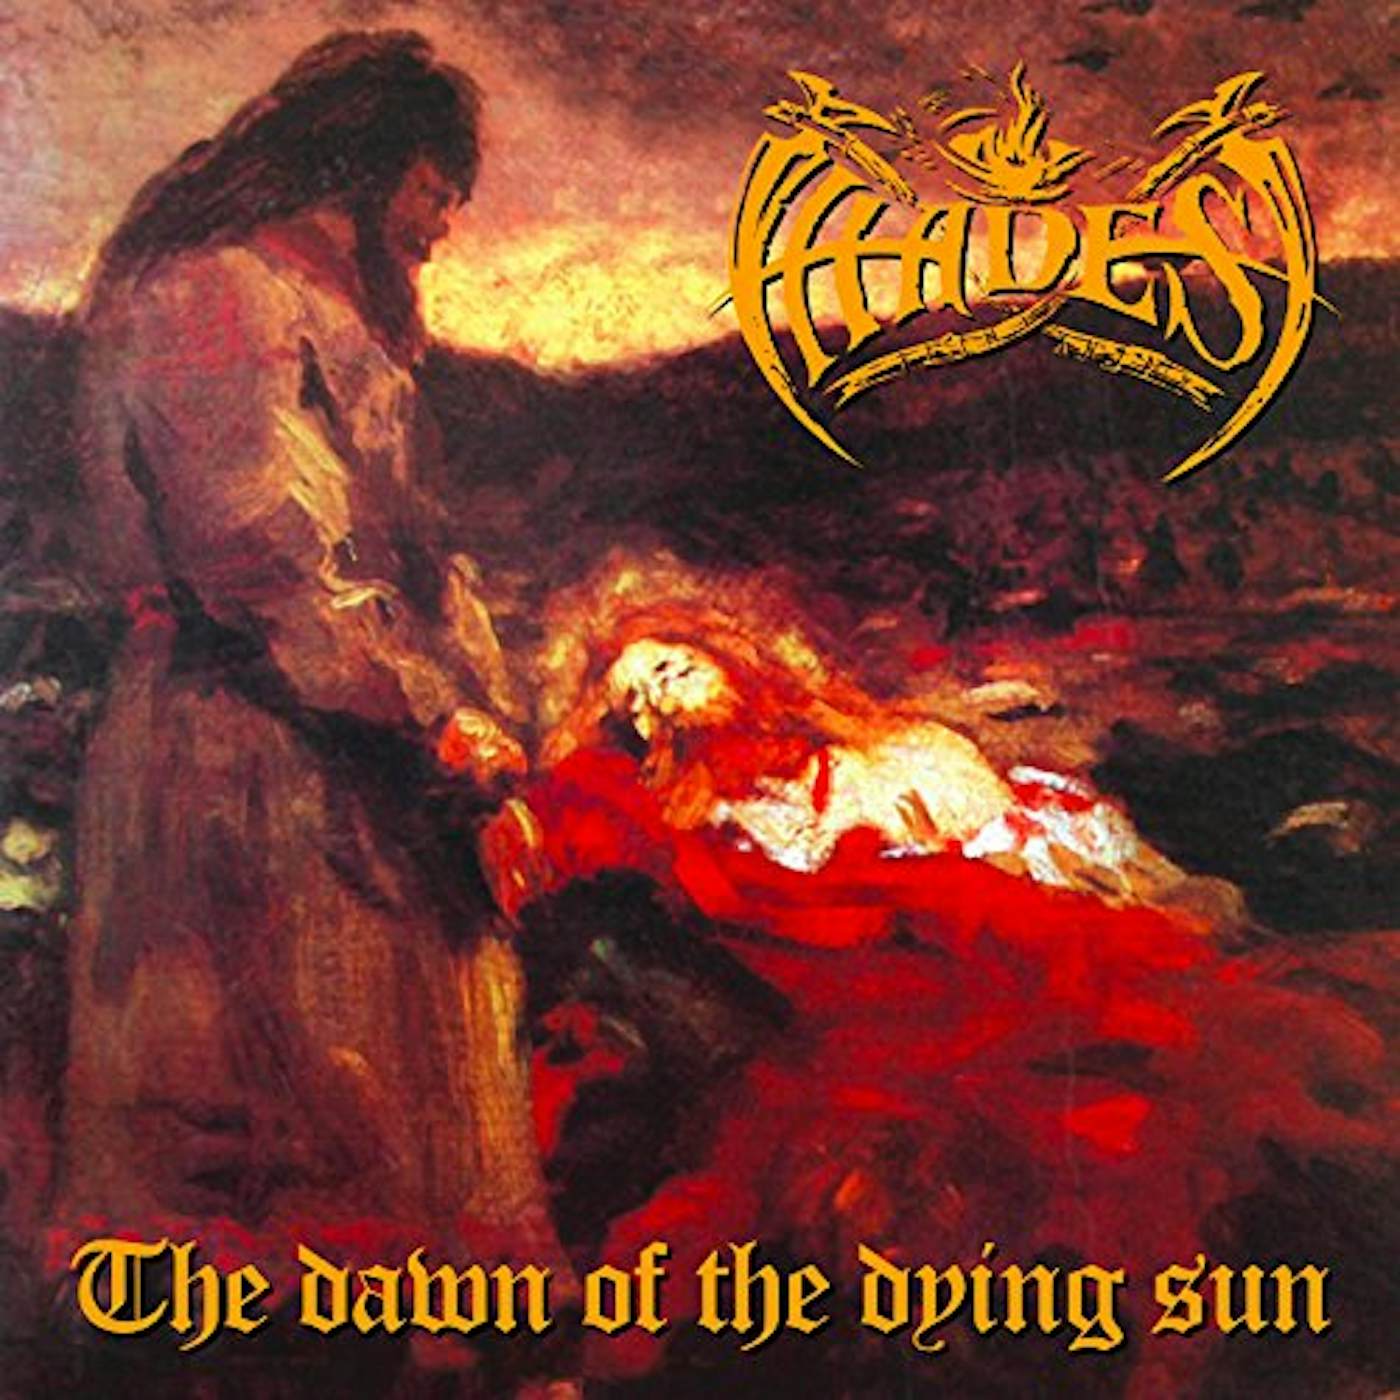 Hades DAWN OF THE DYING SUN CD